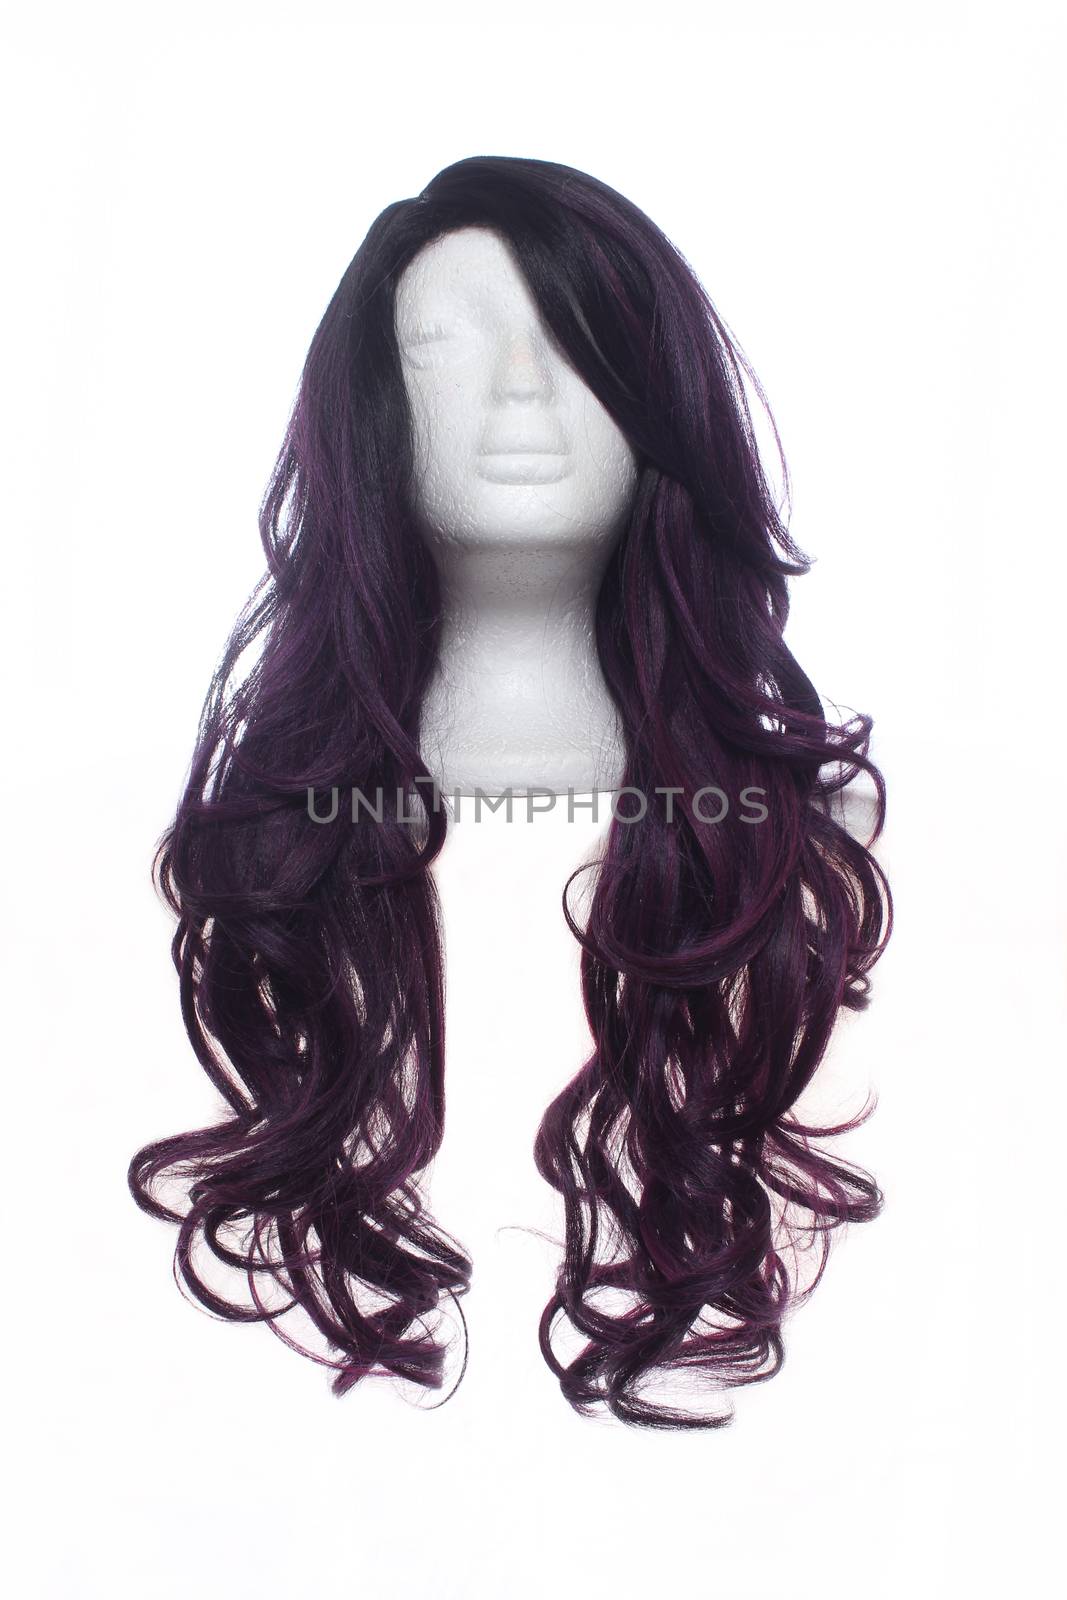 Black and Red Long Wig on Mannequin Head